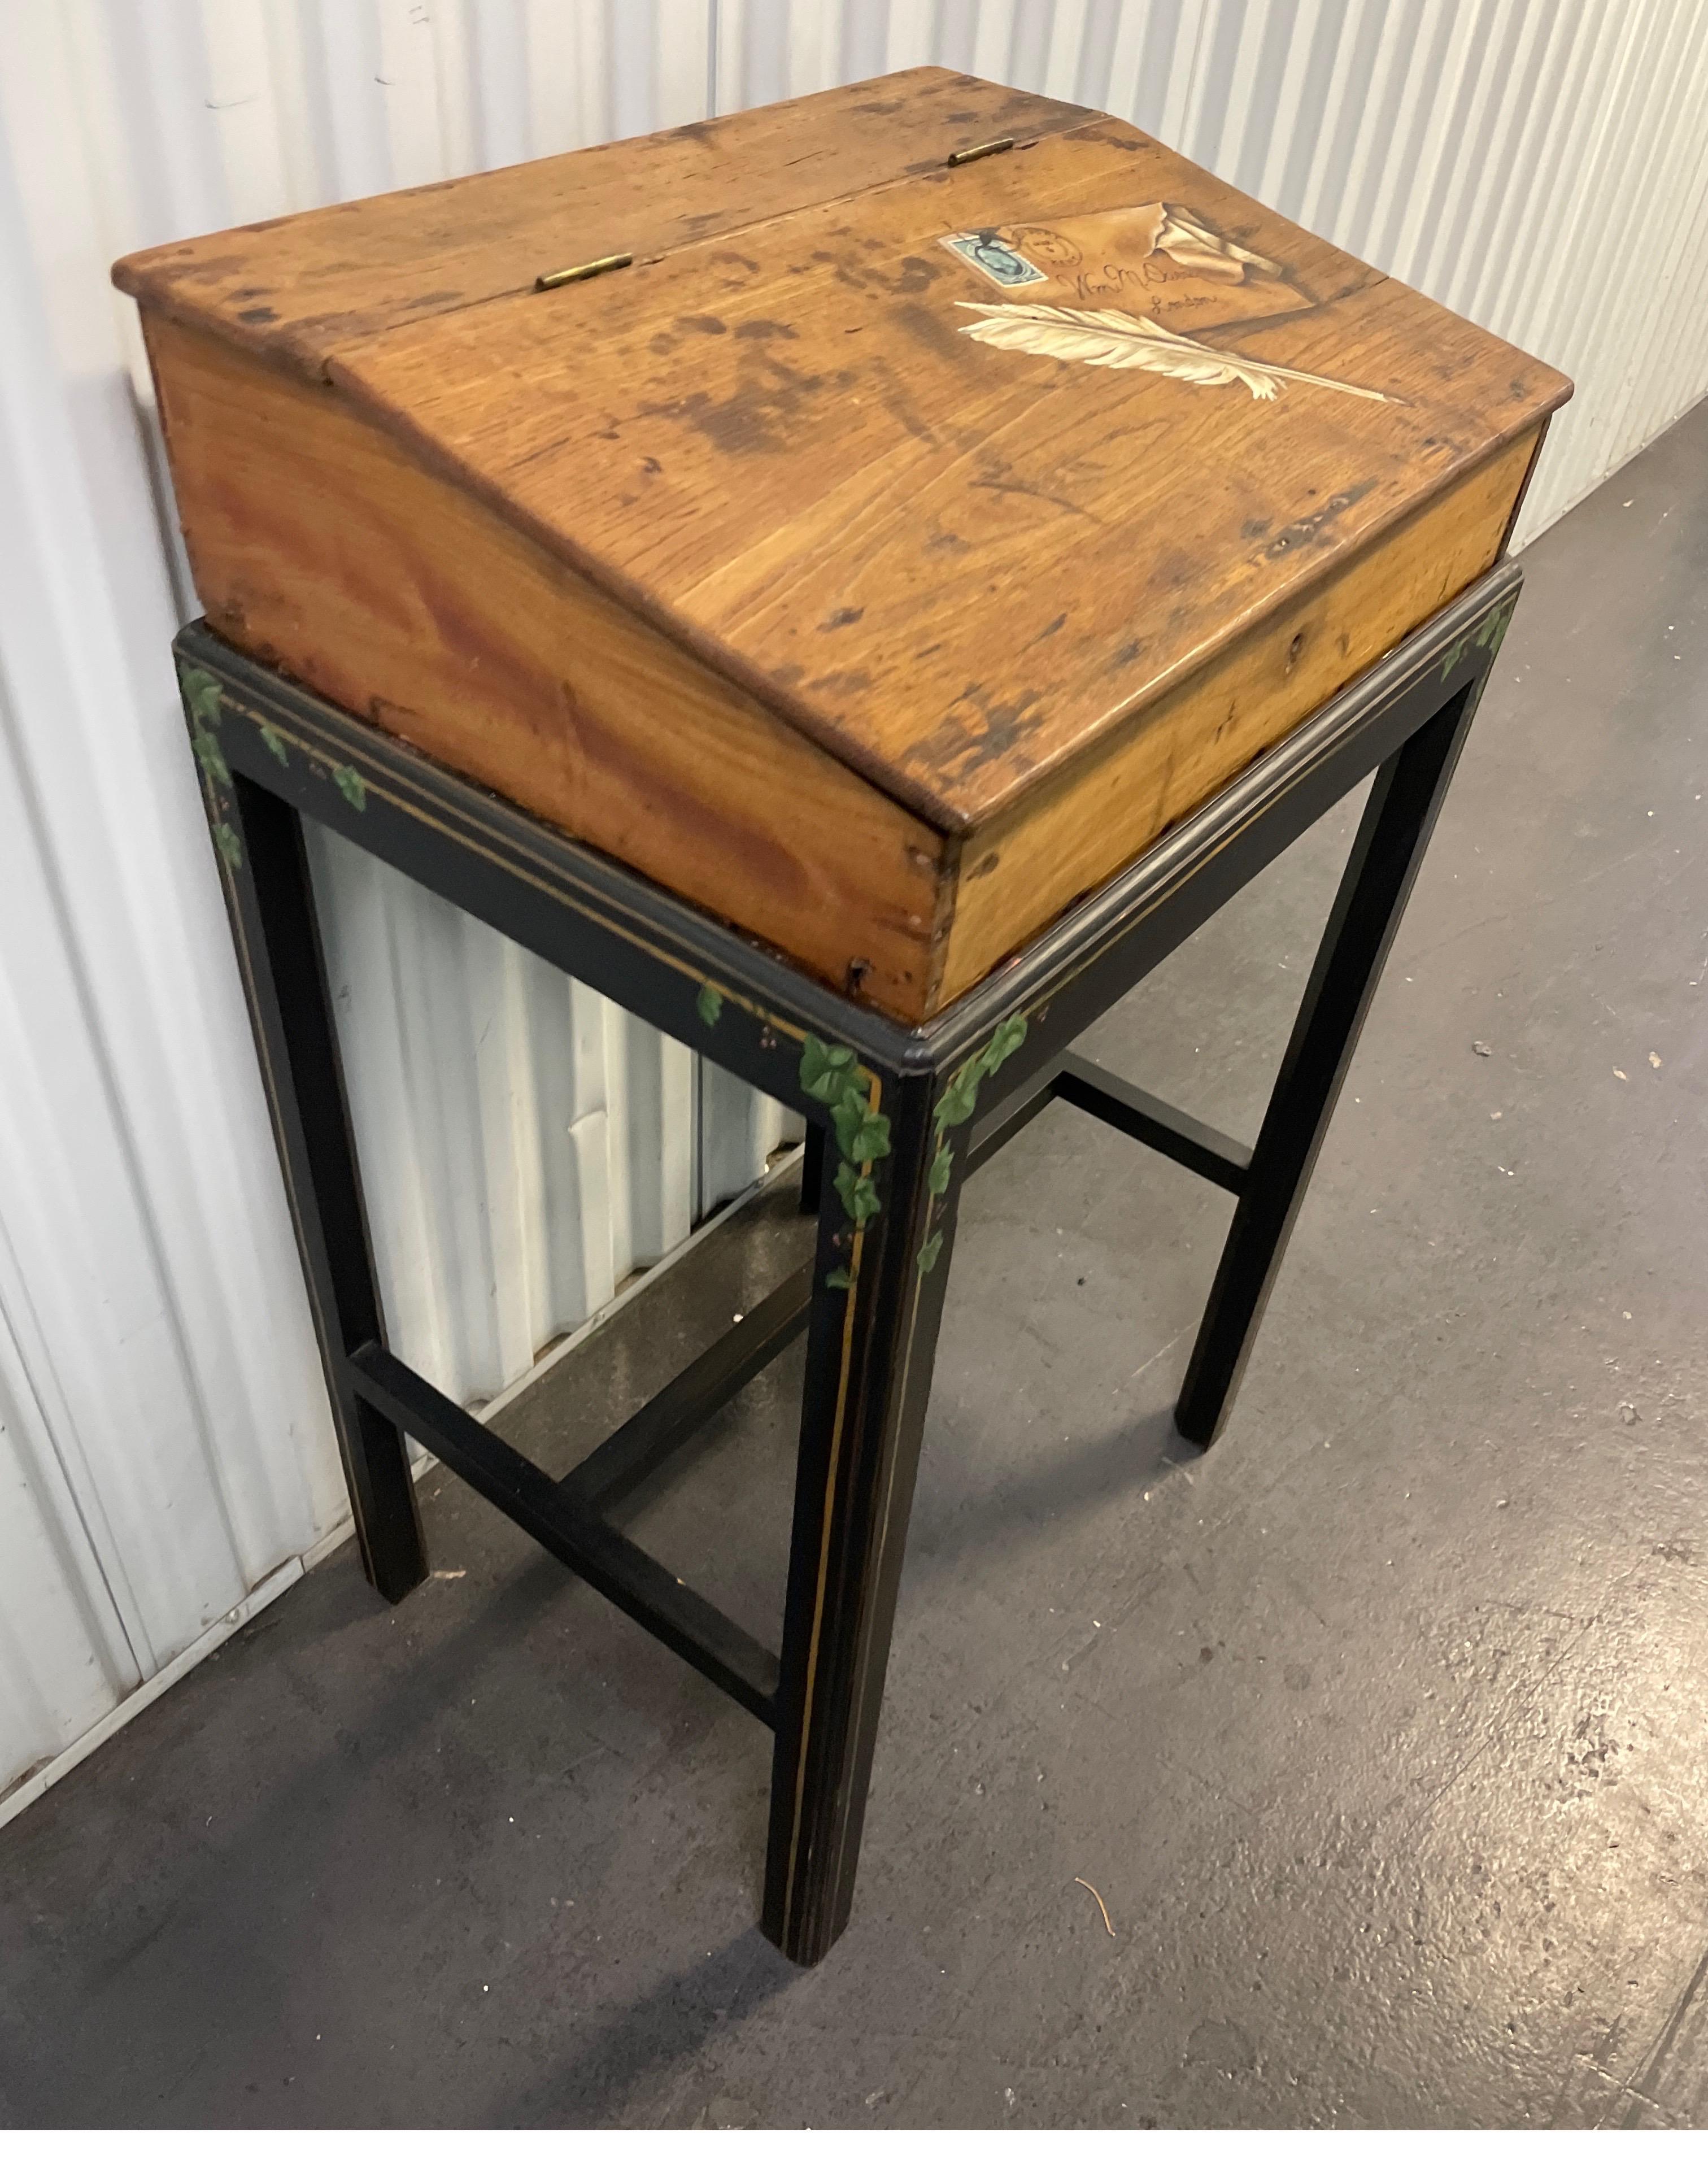 19th Century English Trompe I'oeil Painted Lap Desk on Stand For Sale